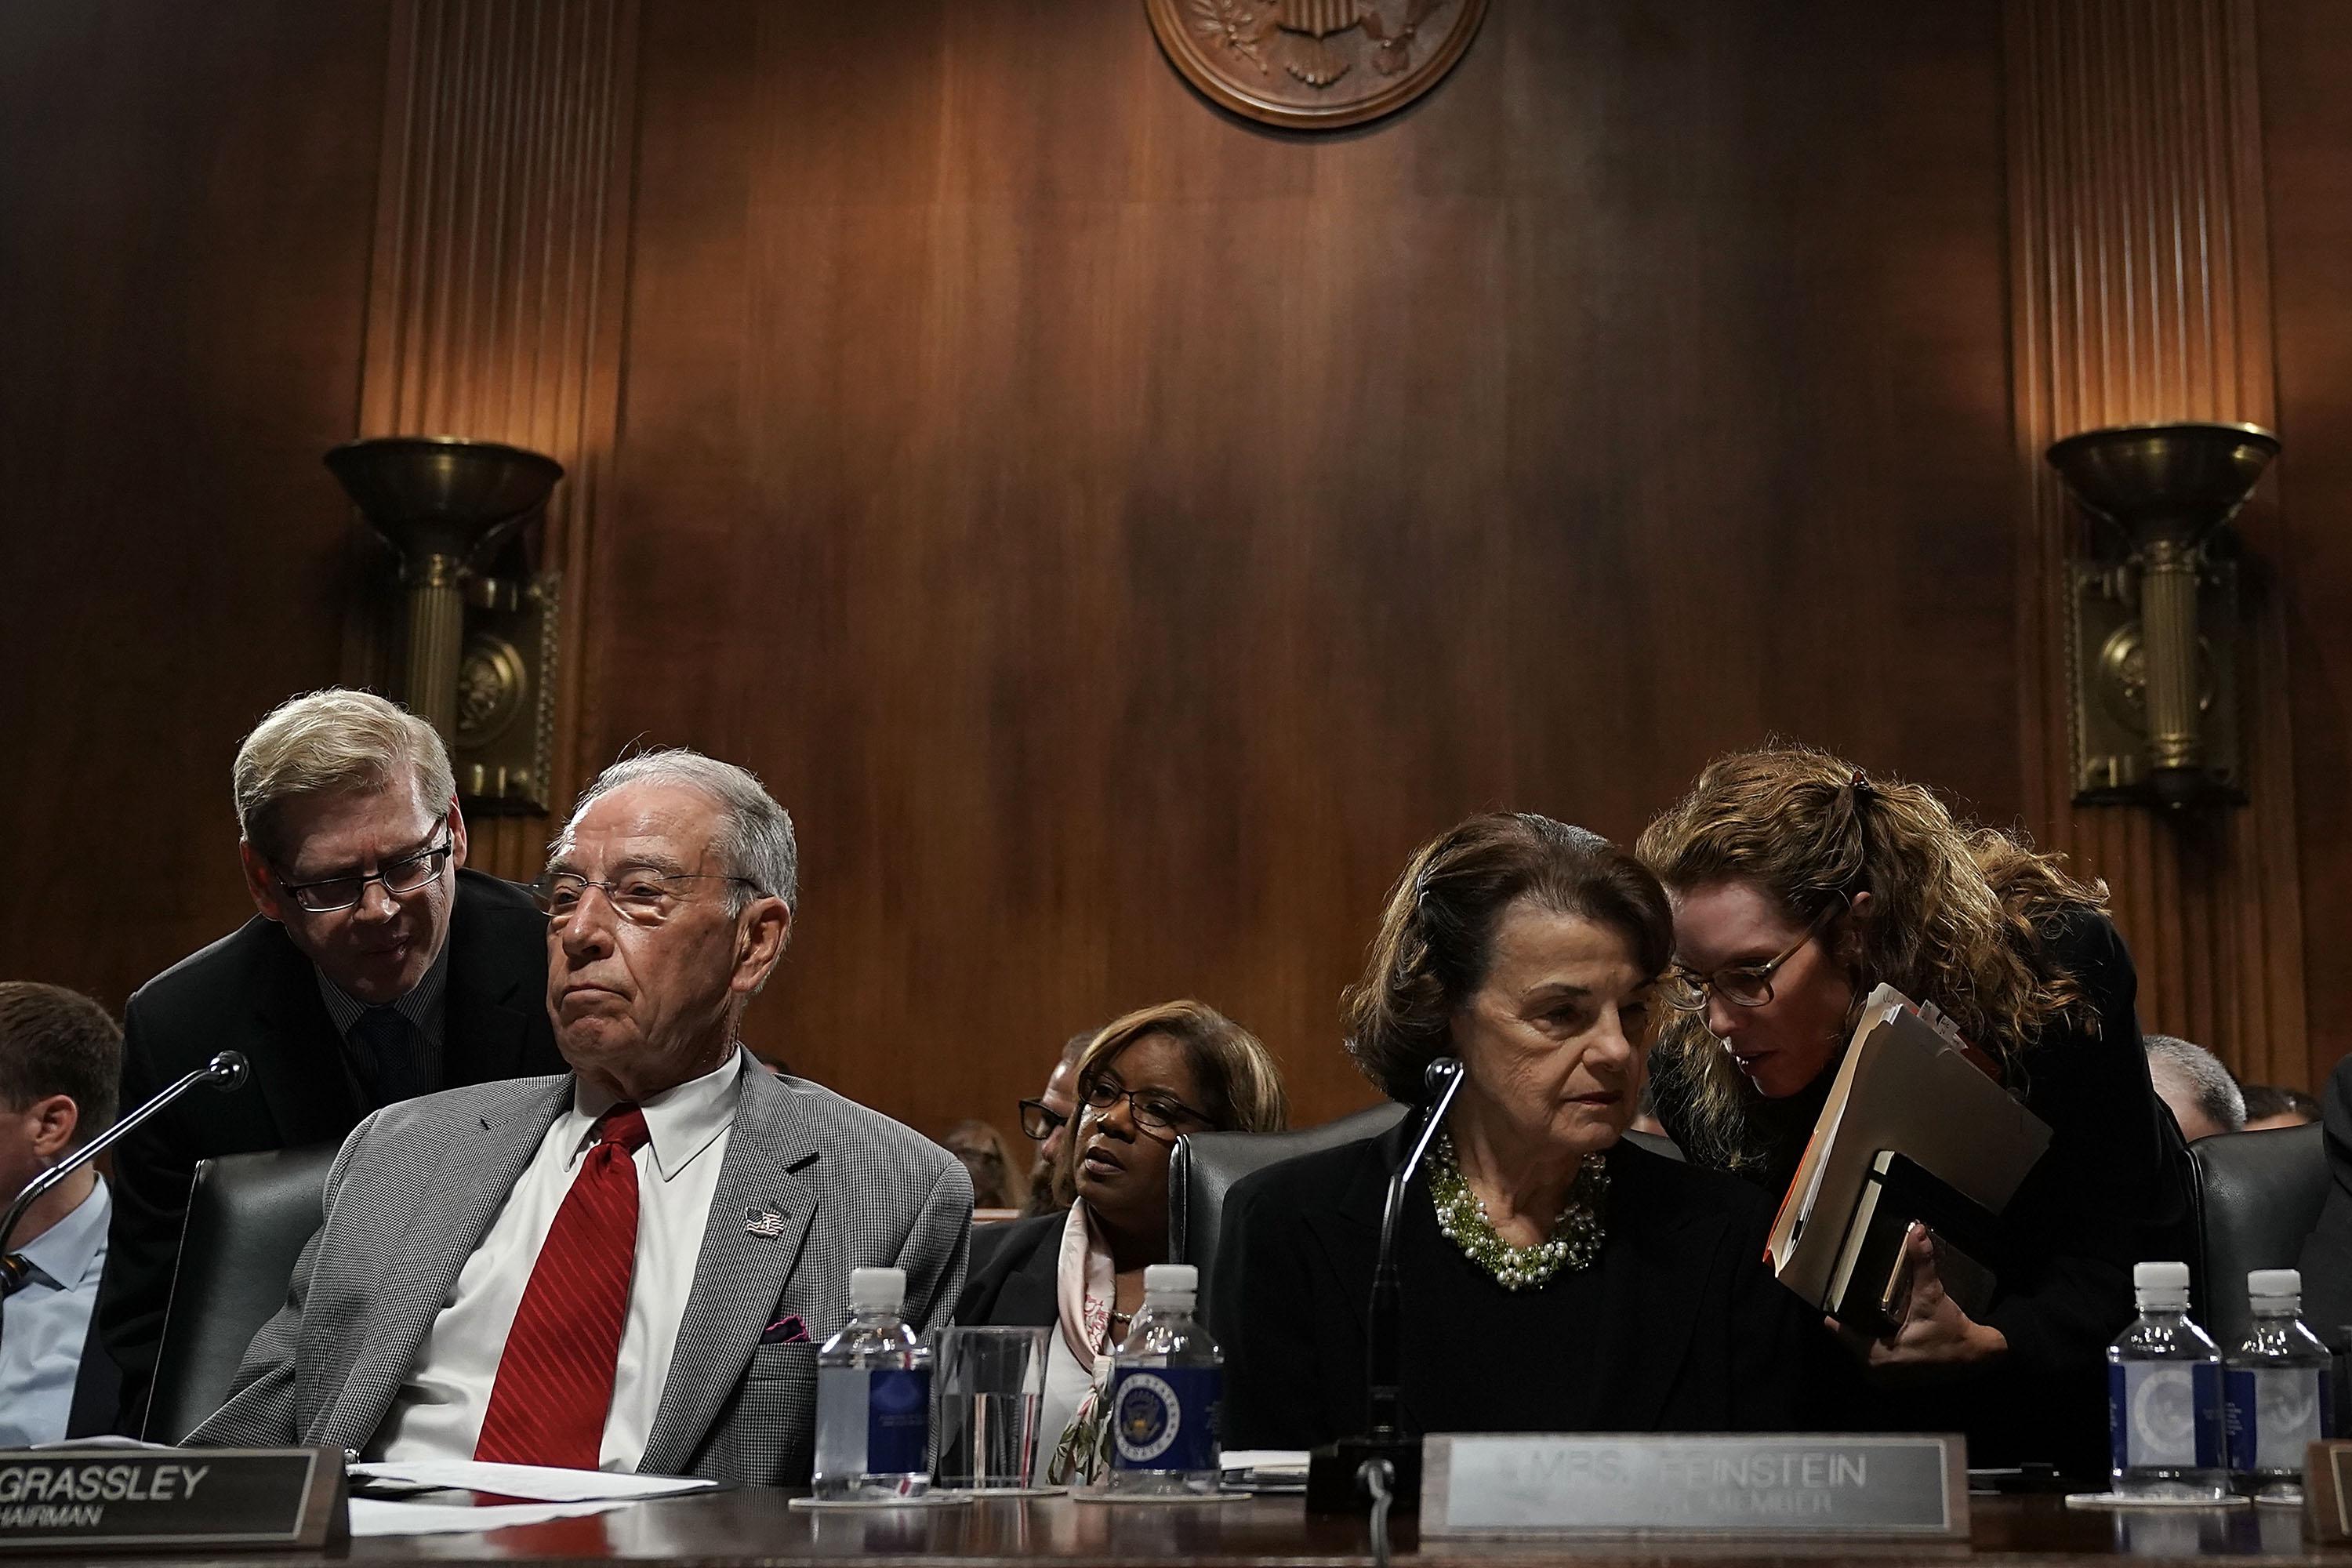 Aides lean in to talk to Sens. Chuck Grassley and Dianne Feinstein during a hearing.